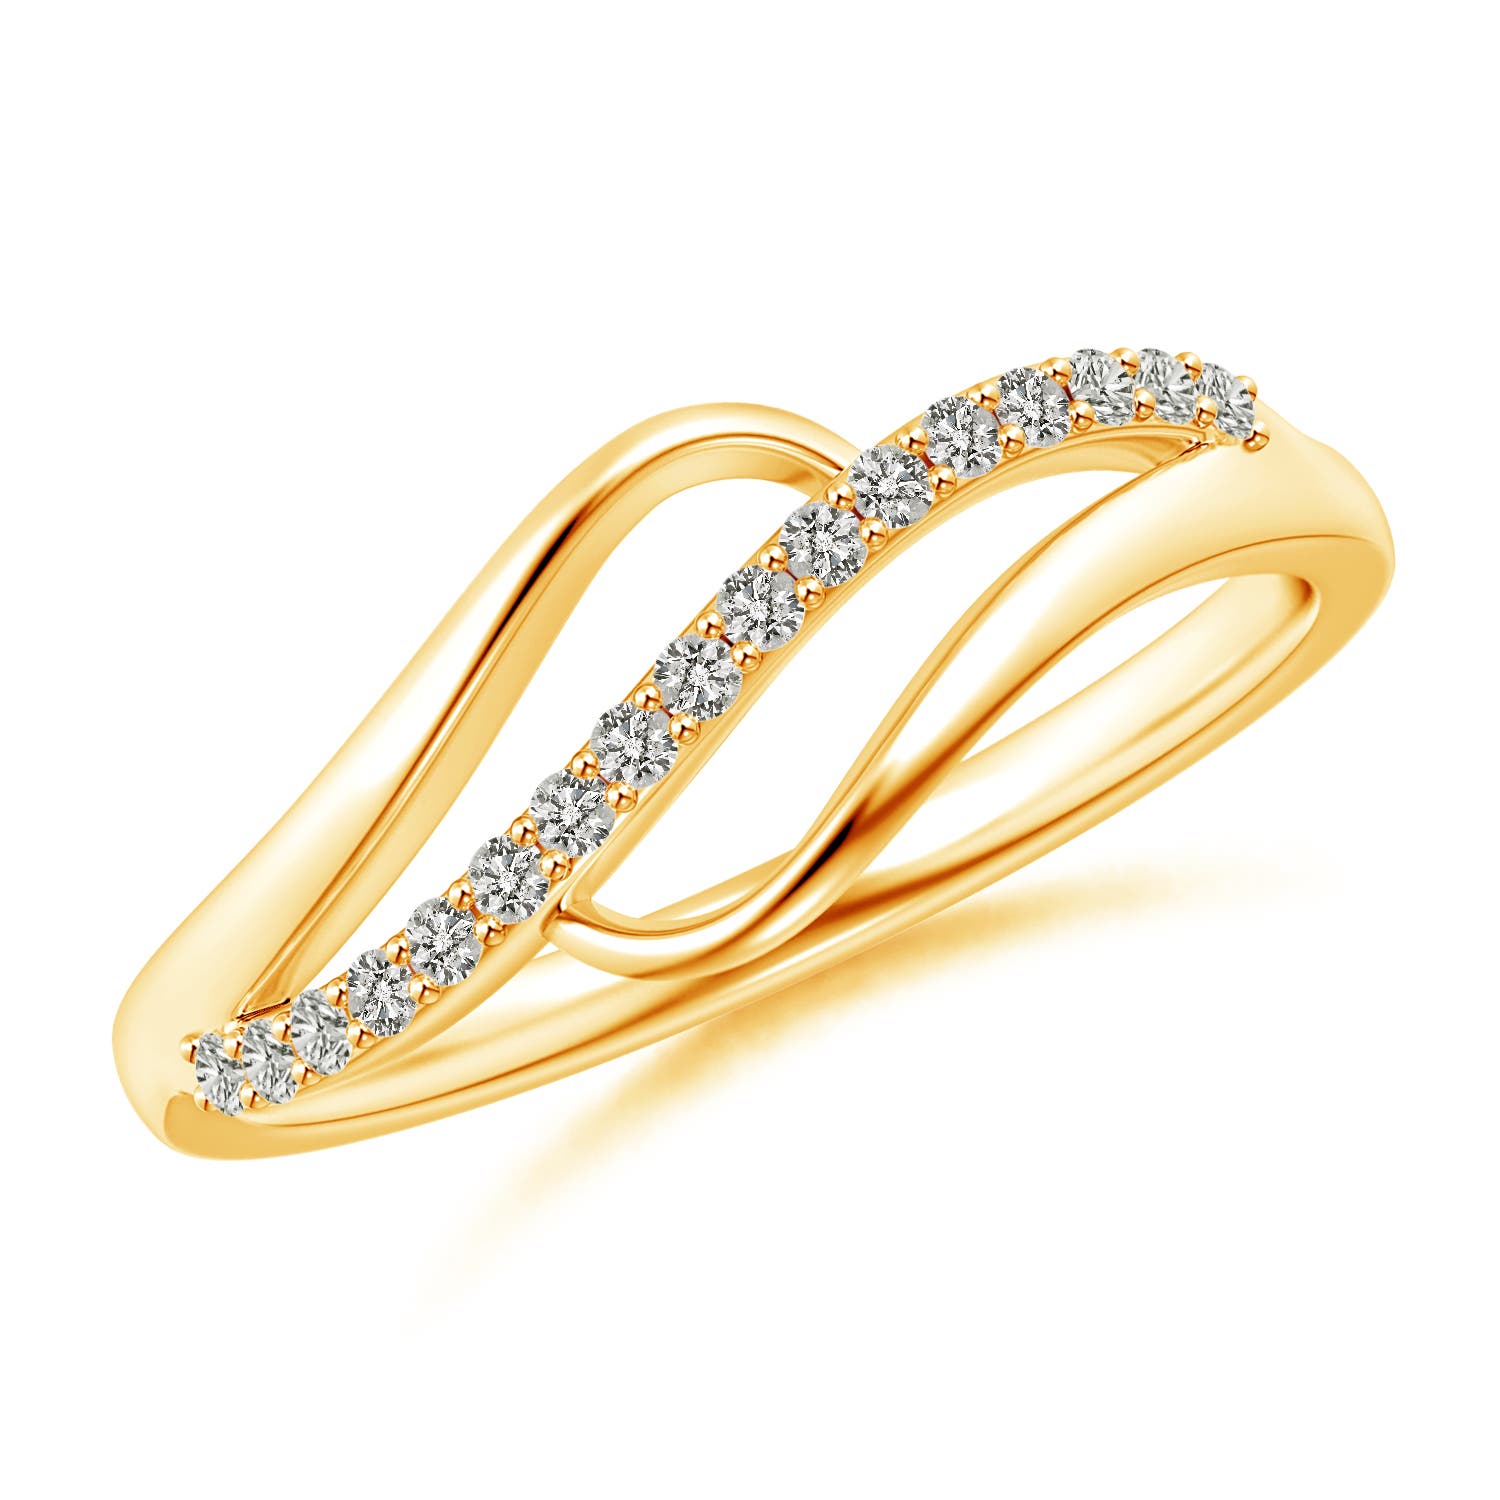 K, I3 / 0.17 CT / 14 KT Yellow Gold